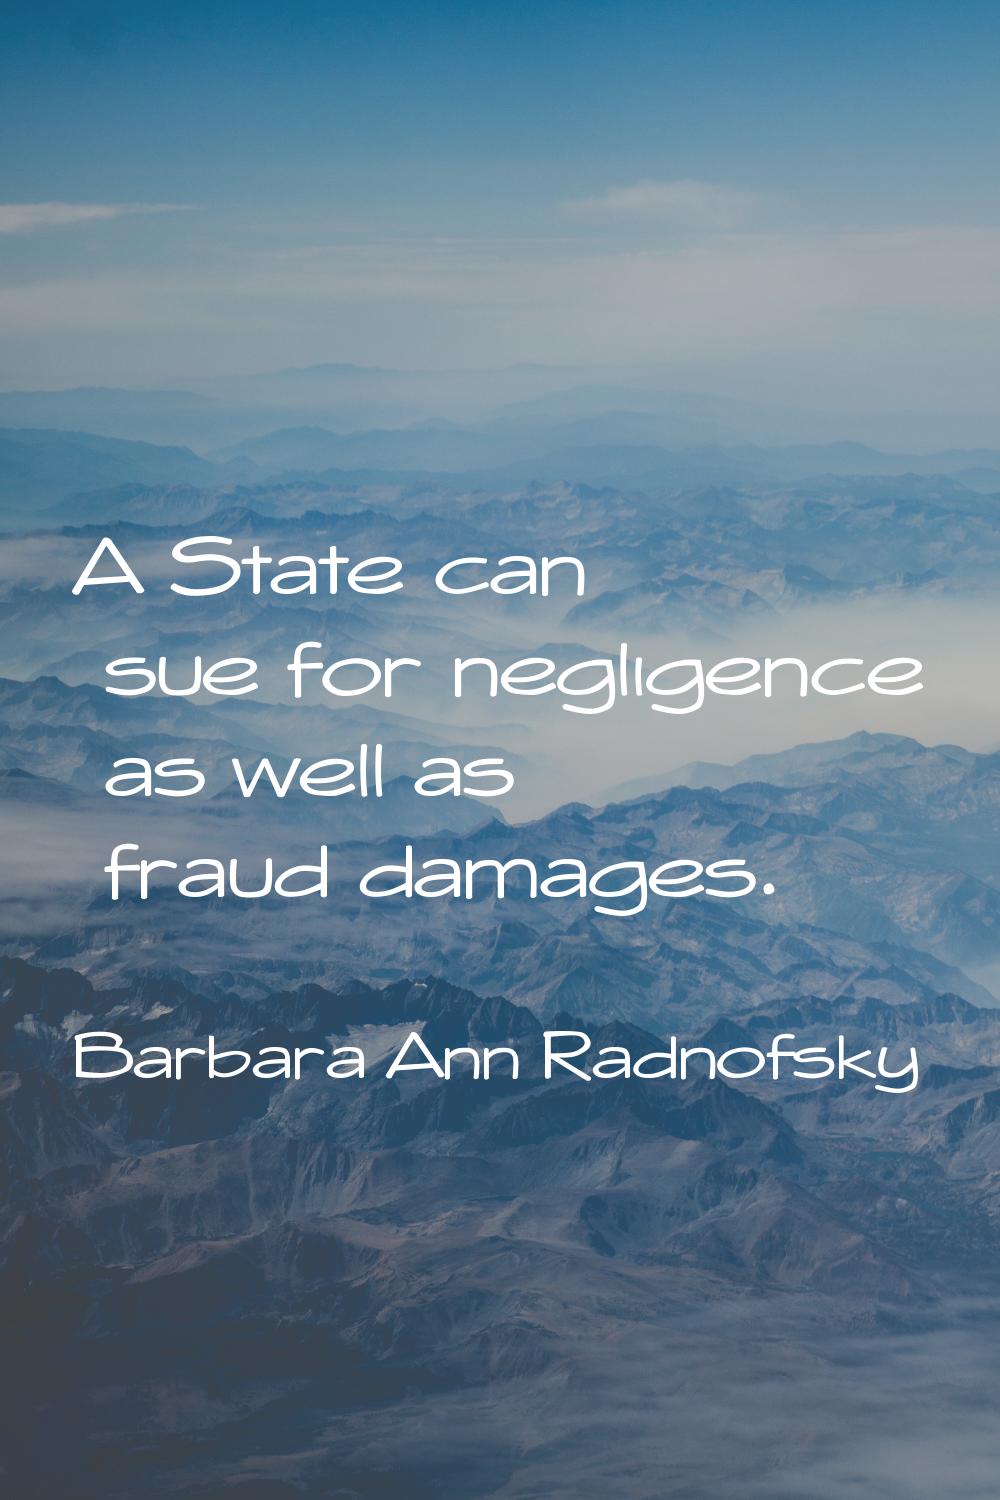 A State can sue for negligence as well as fraud damages.